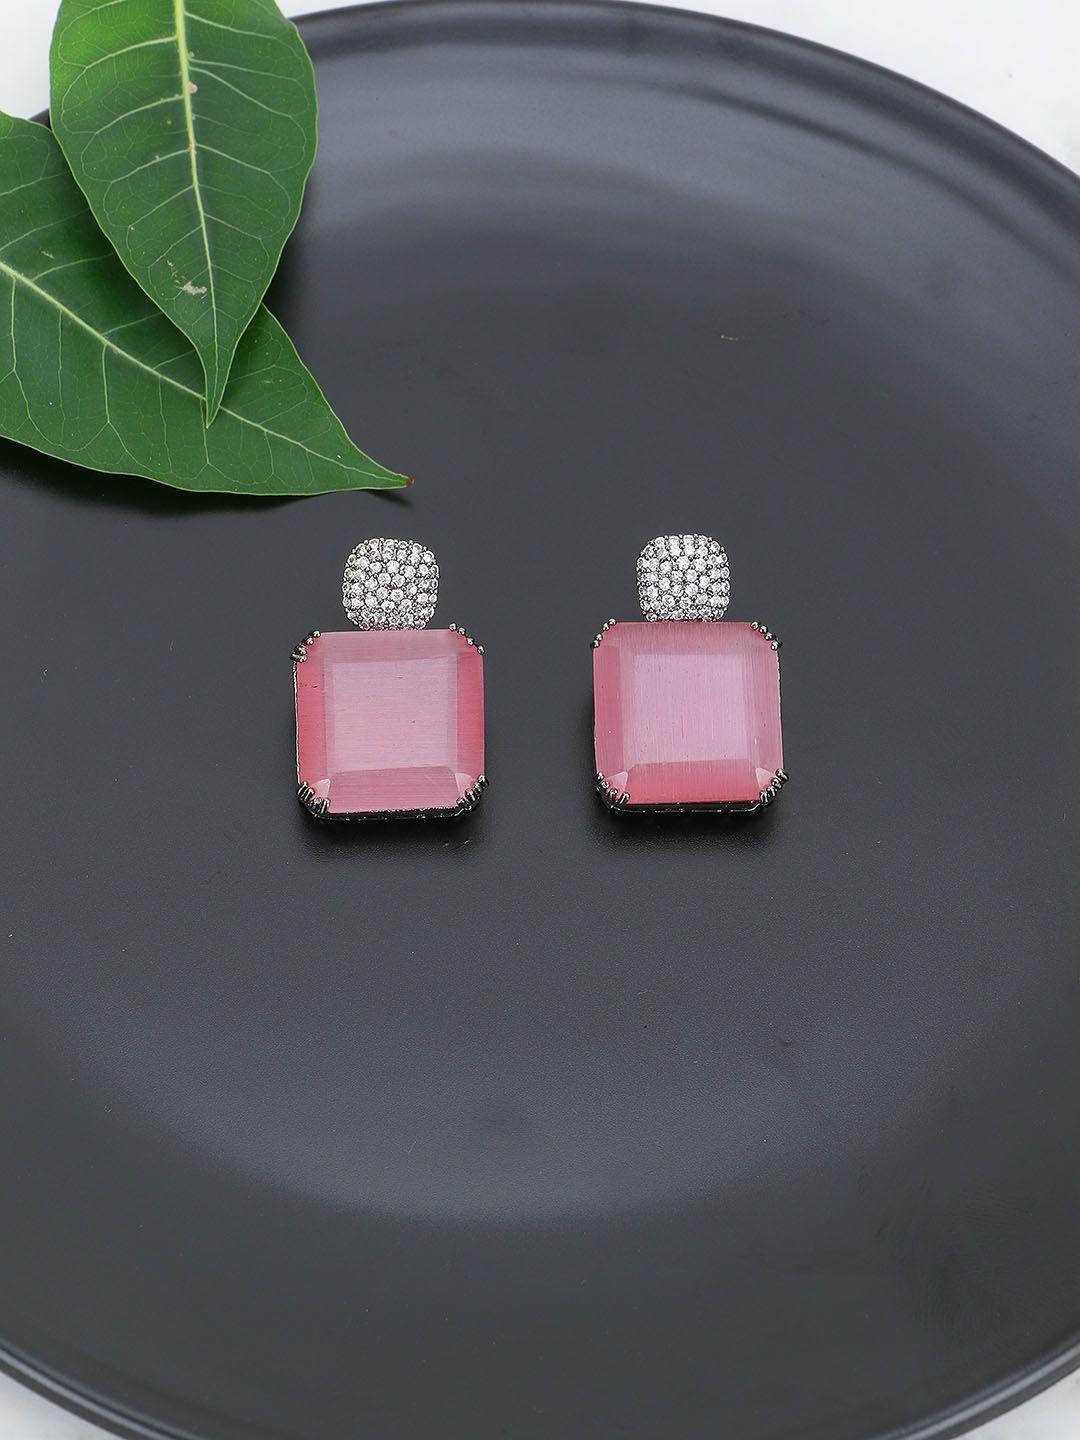 adwitiya collection silver-plated classic studs earrings